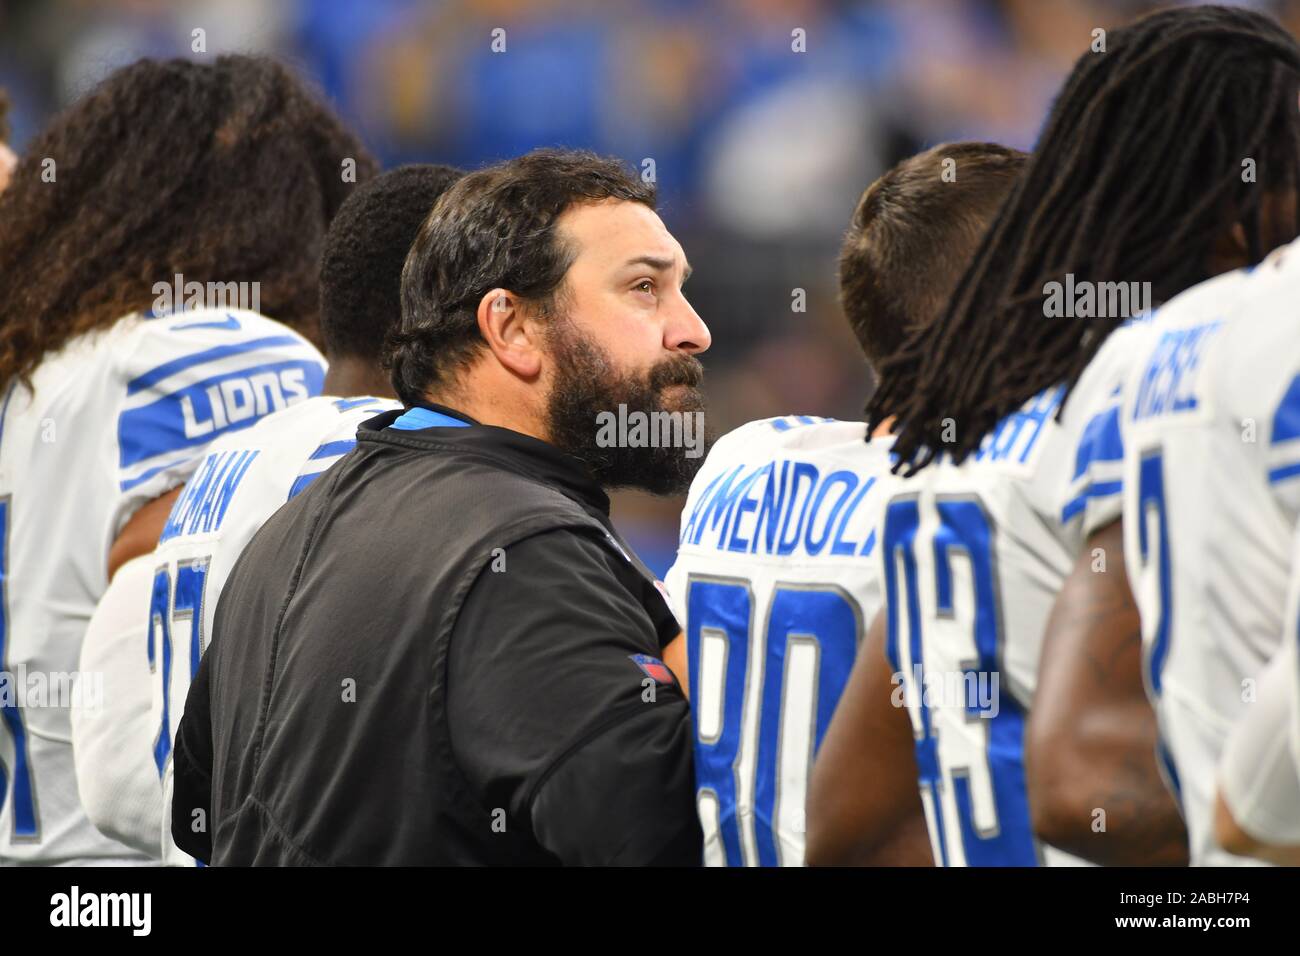 DETROIT, MI - NOVEMBER 17: Detroit Lions head coach Matt Patricia during the national anthem prior to the NFL game between Dallas Cowboys and Detroit Lions on November 17, 2019 at Ford Field in Detroit, MI (Photo by Allan Dranberg/Cal Sport Media) Stock Photo